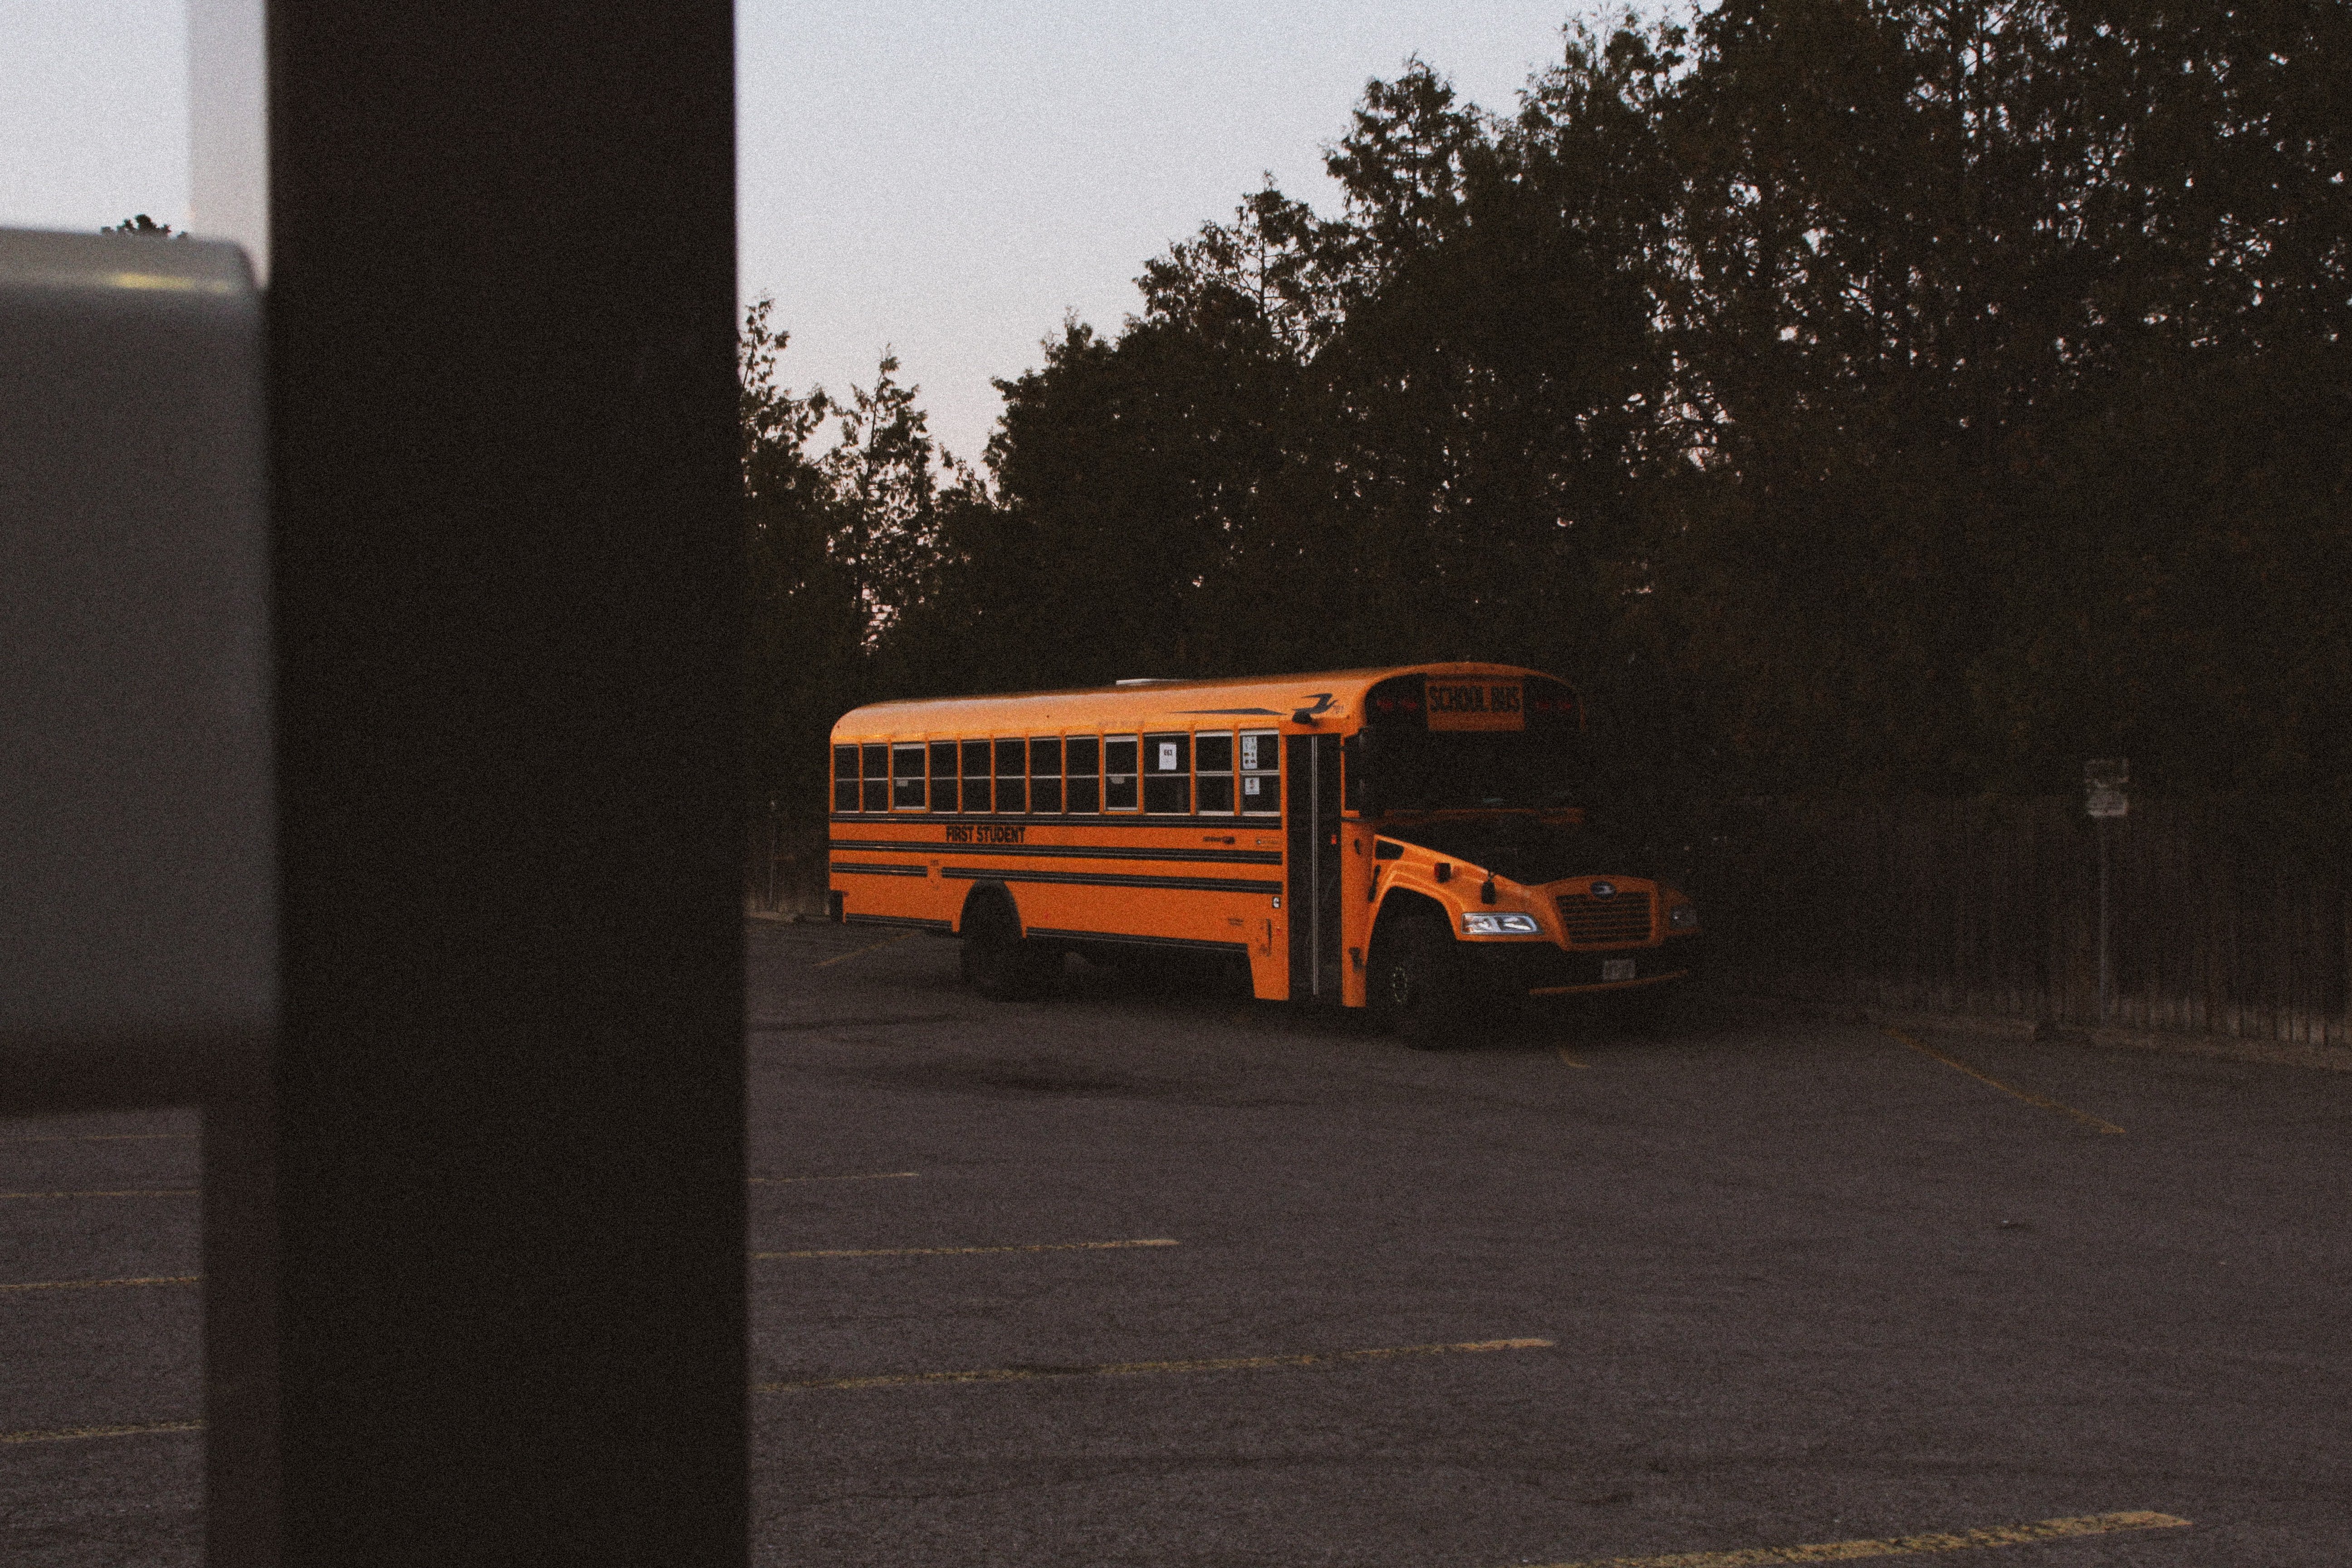 OP's mom saw a school bus pulling up outside the house earlier than usual. | Source: Unsplash 